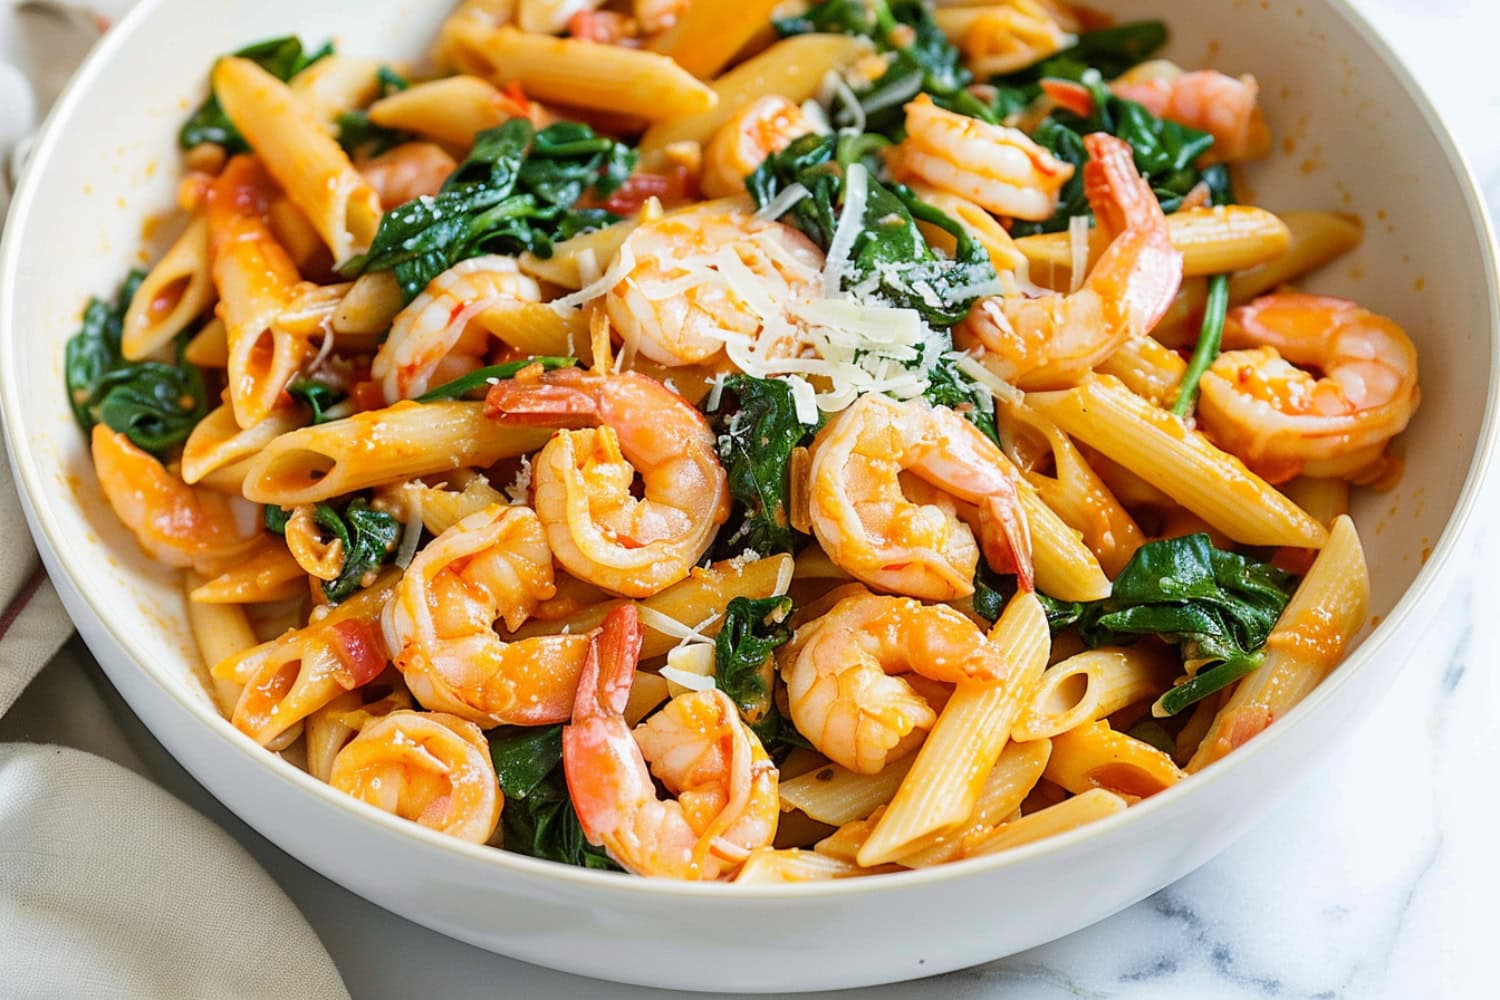 Flavorful shrimp and spinach pasta, garnished with chopped parsley in a white bowl.